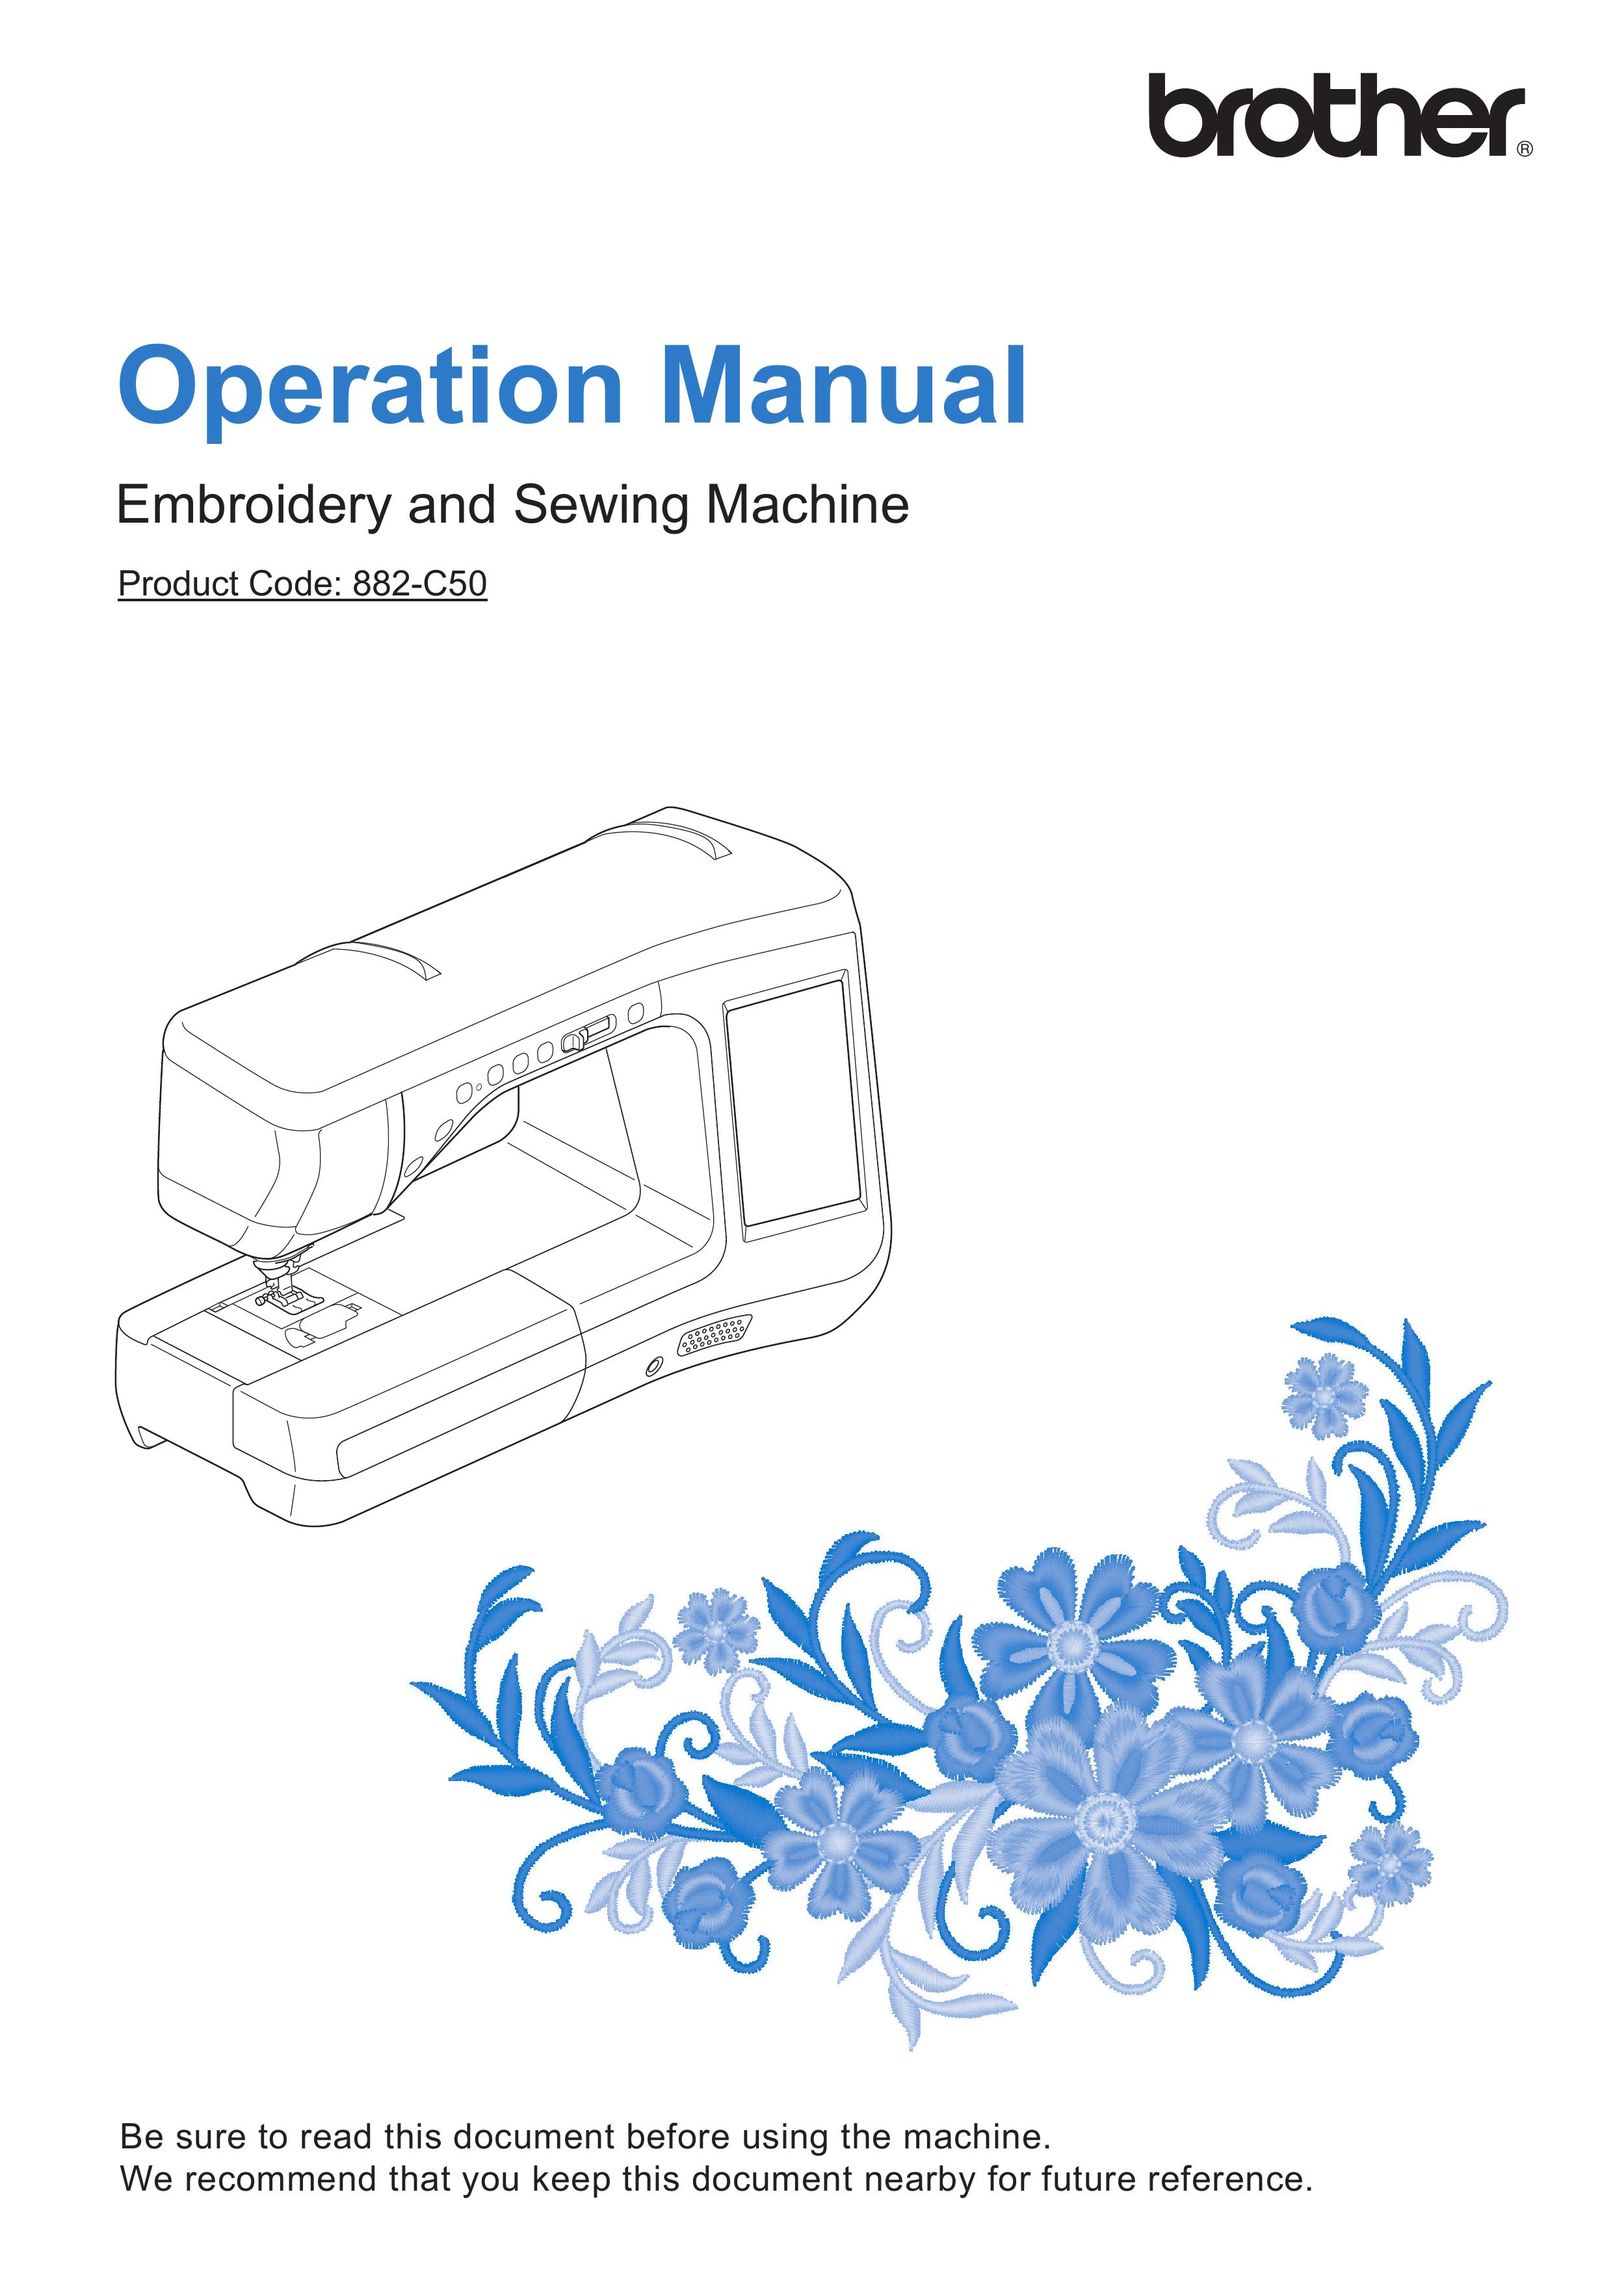 Brother 882-C50 Sewing Machine User Manual (Page 1)